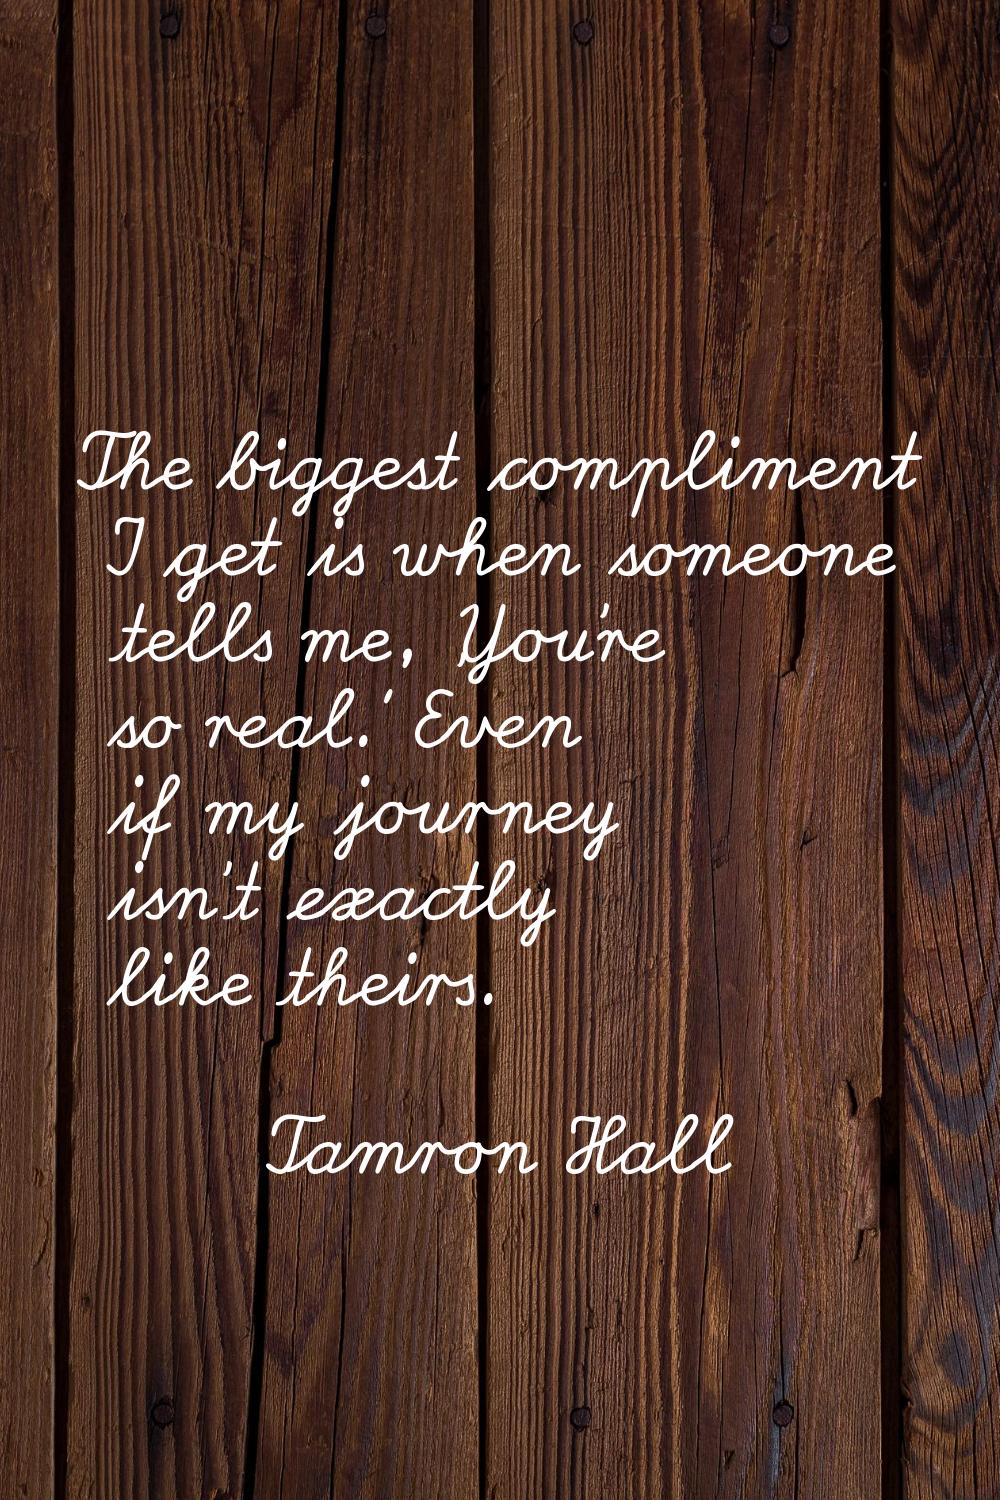 The biggest compliment I get is when someone tells me, 'You're so real.' Even if my journey isn't e